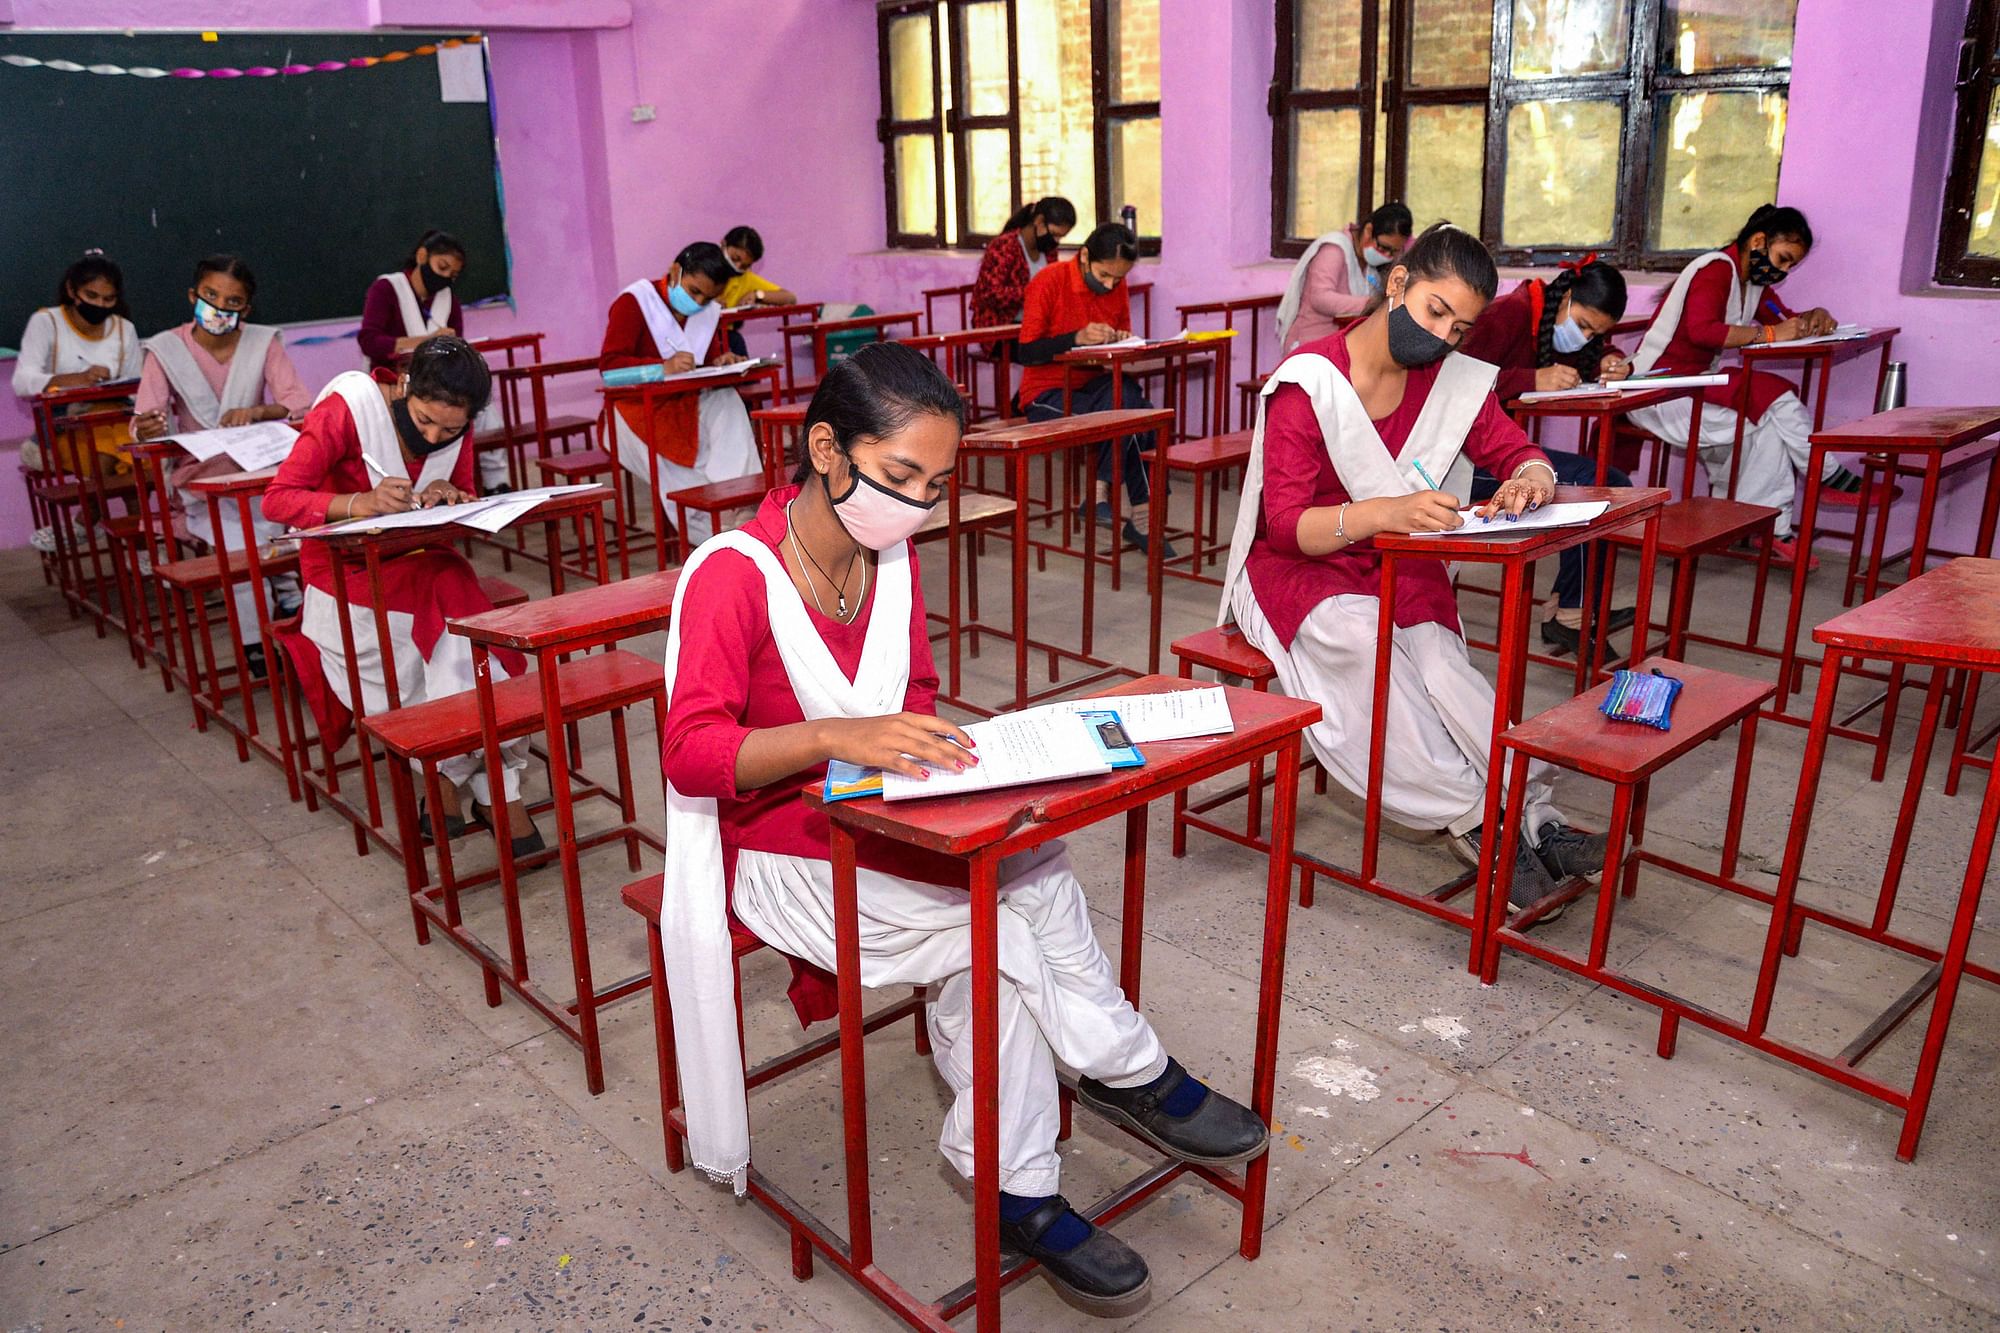 UP Board exam were postponed in April amid rising COVID-19 cases. Image used for representation purpose.